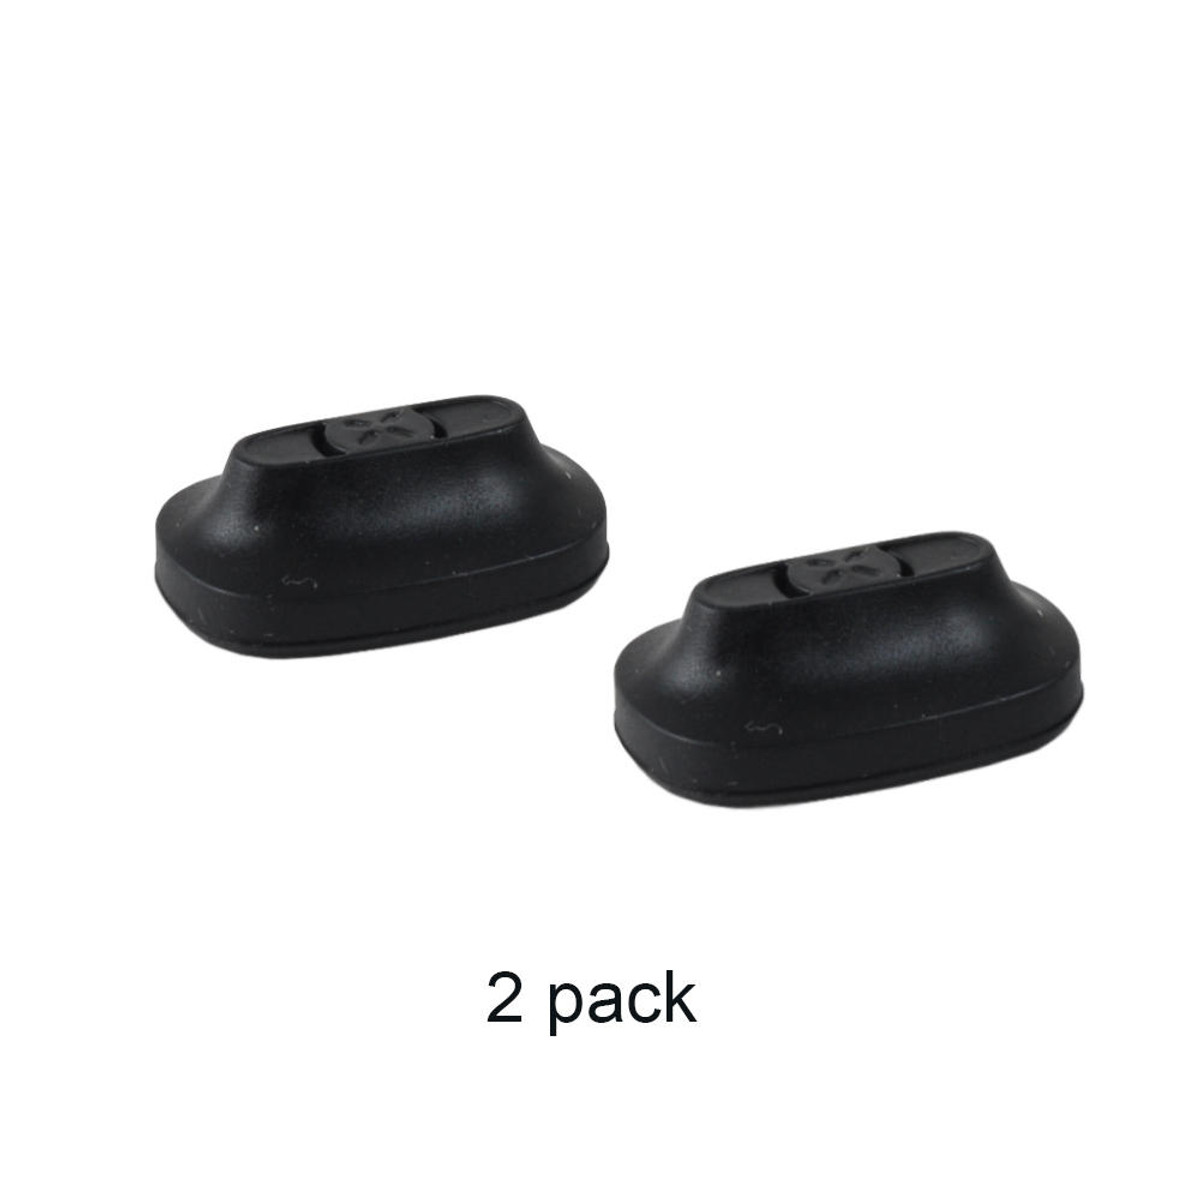 PAX Labs PAX 2/3 Raised Mouthpiece 2 pack